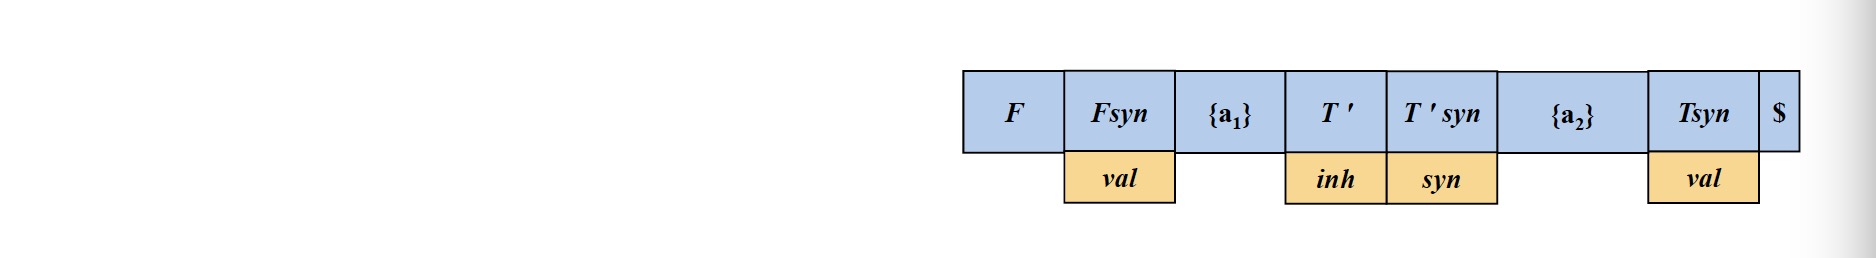 fig10